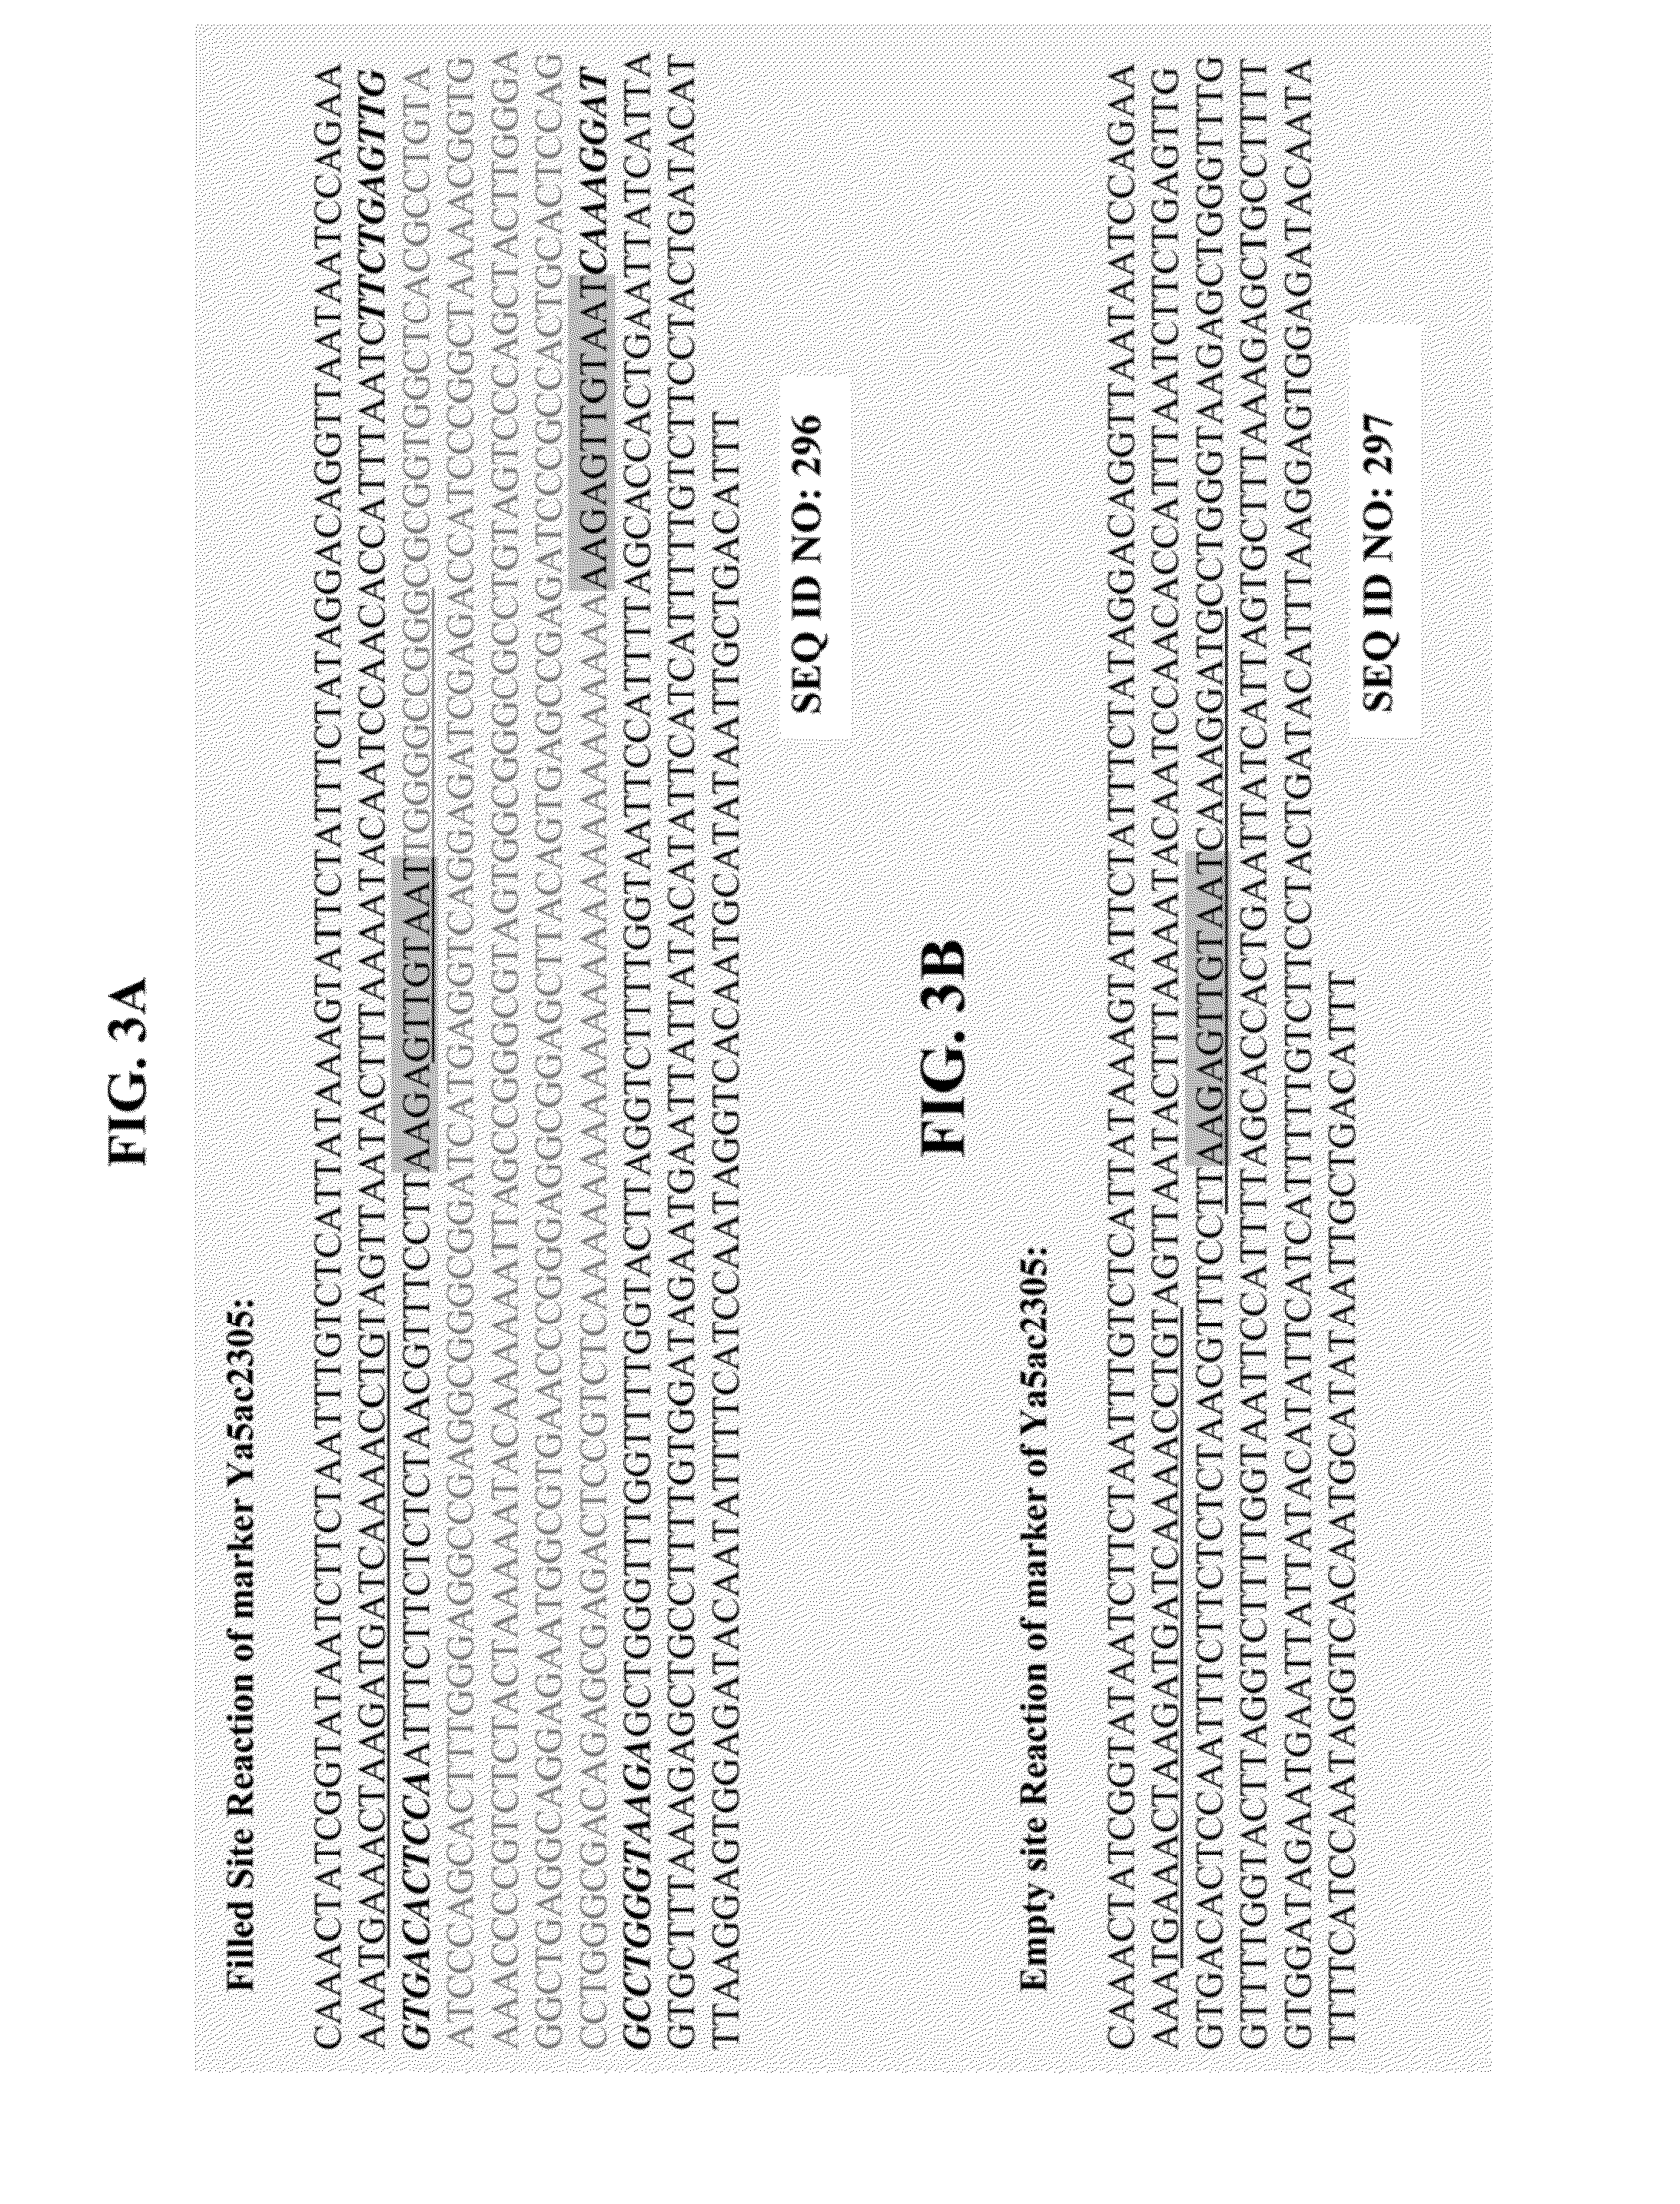 Method for genetic detection using interspersed genetic elements:  a multiplexed DNA analysis system